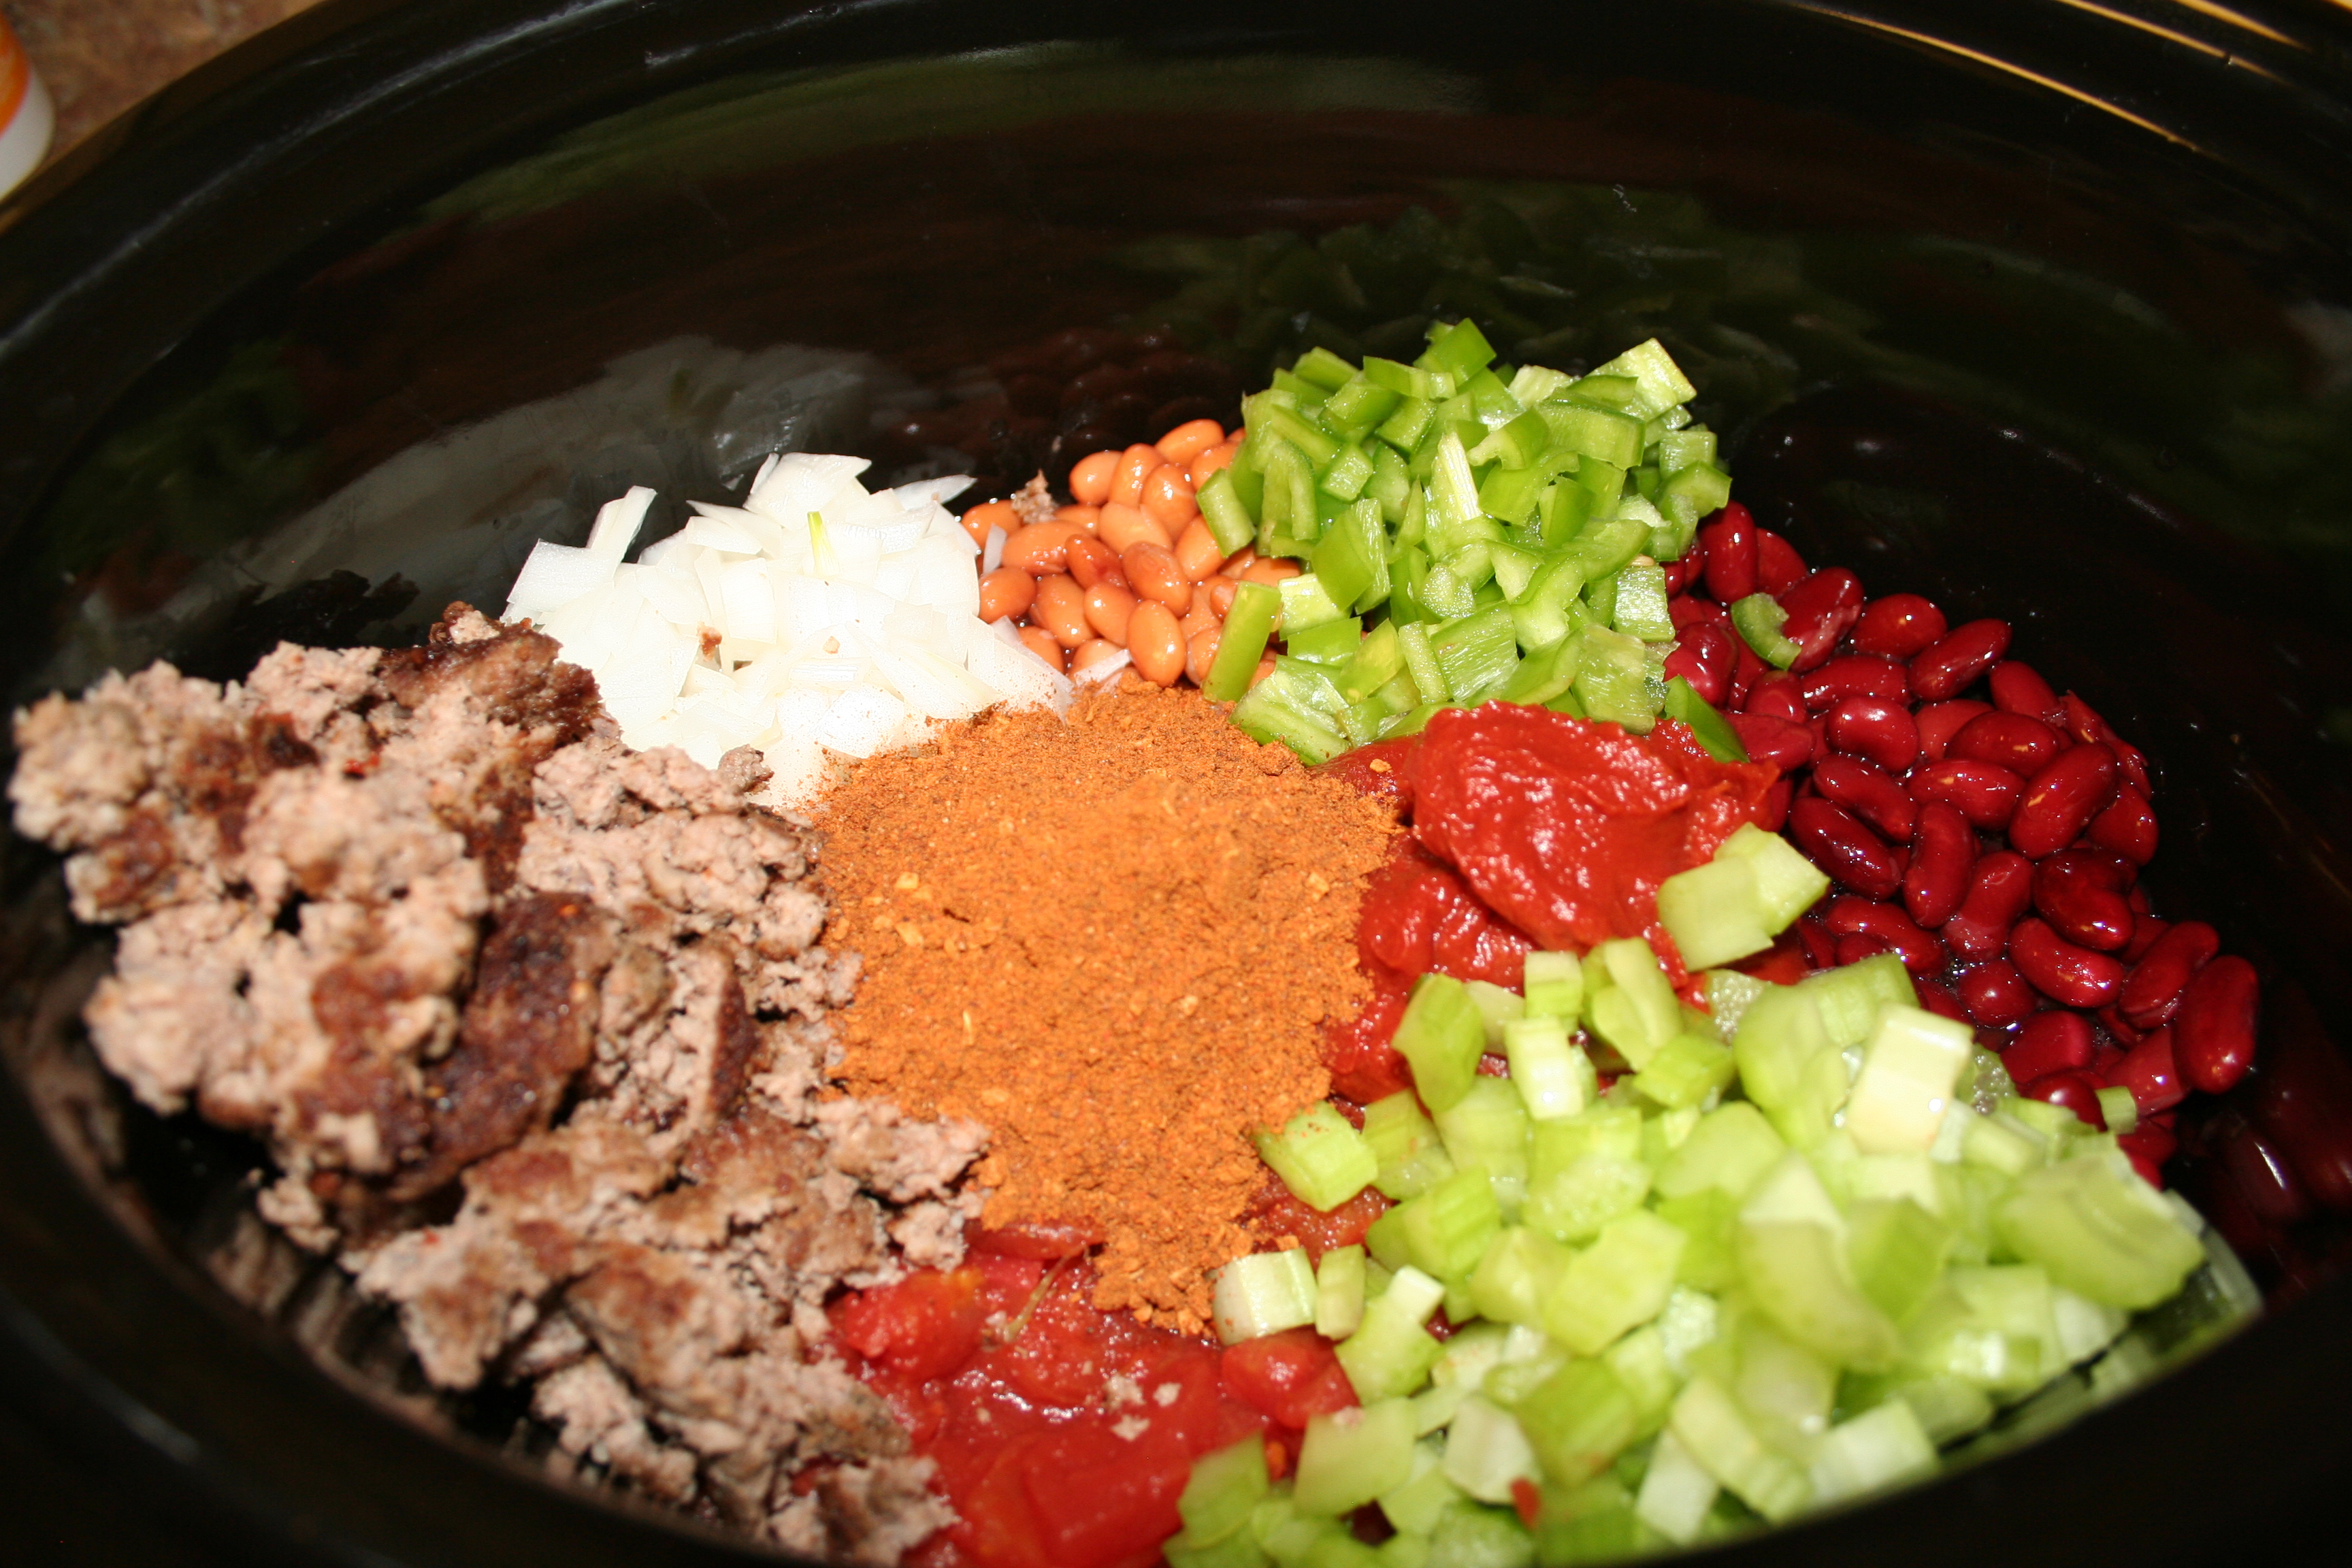 ingredients for wendy's chili in slow cooker not stirred together.